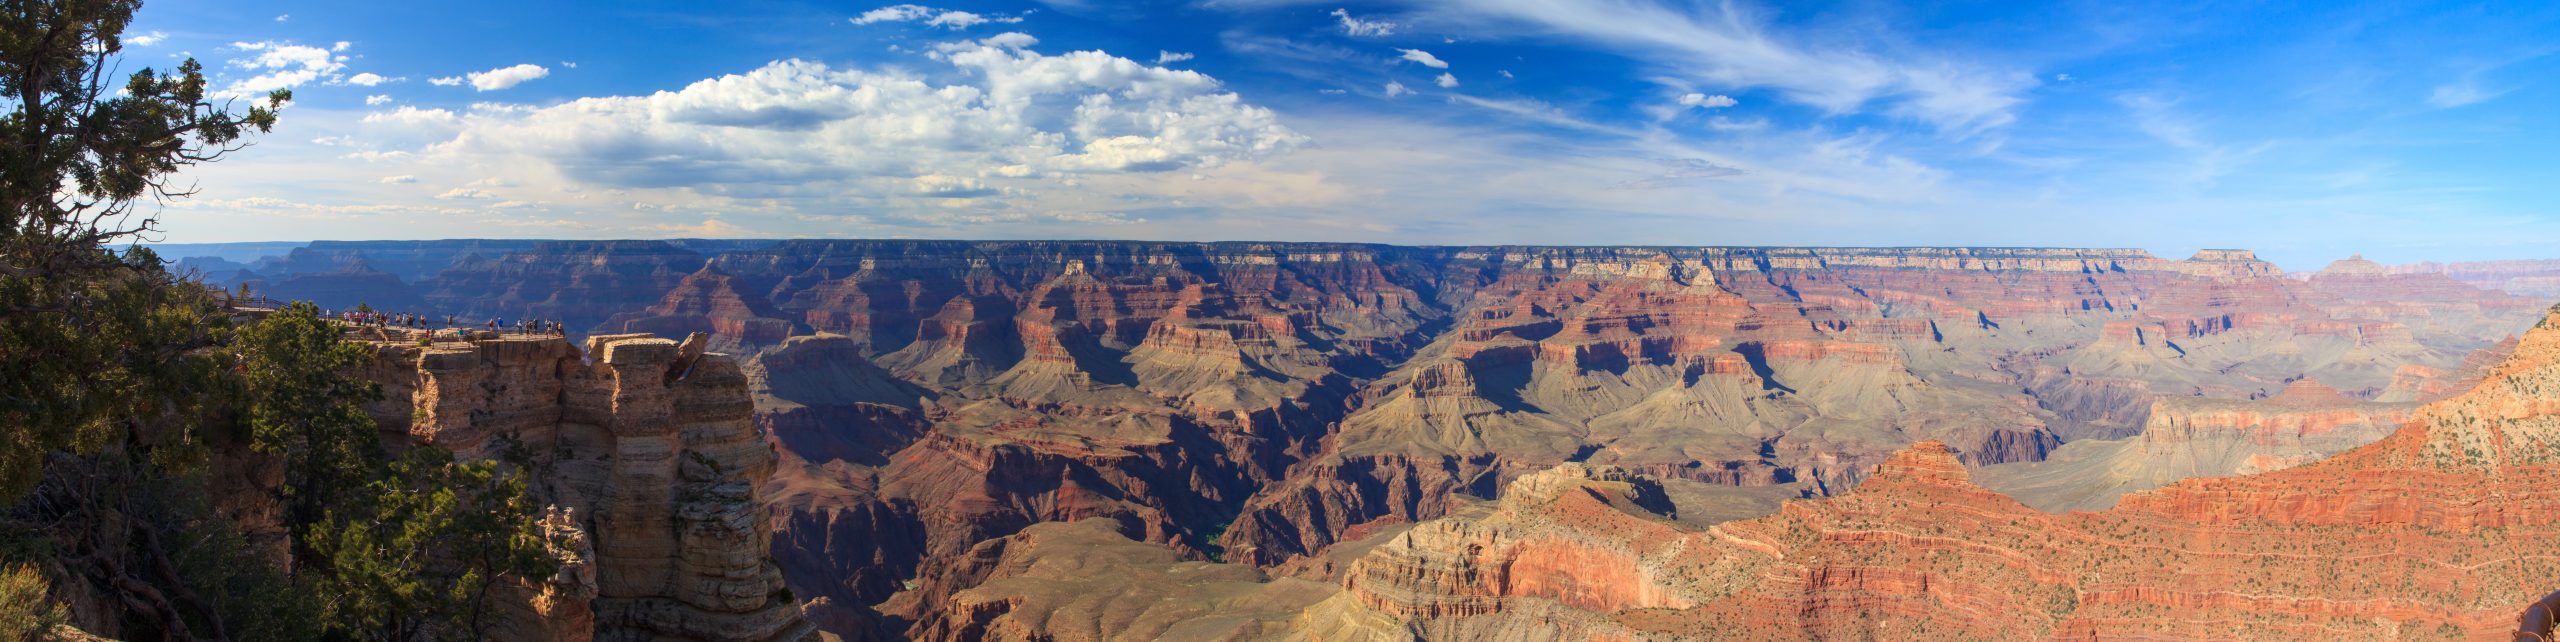 Photo of Grand Canyon strata showing that they are continuous across the canyon